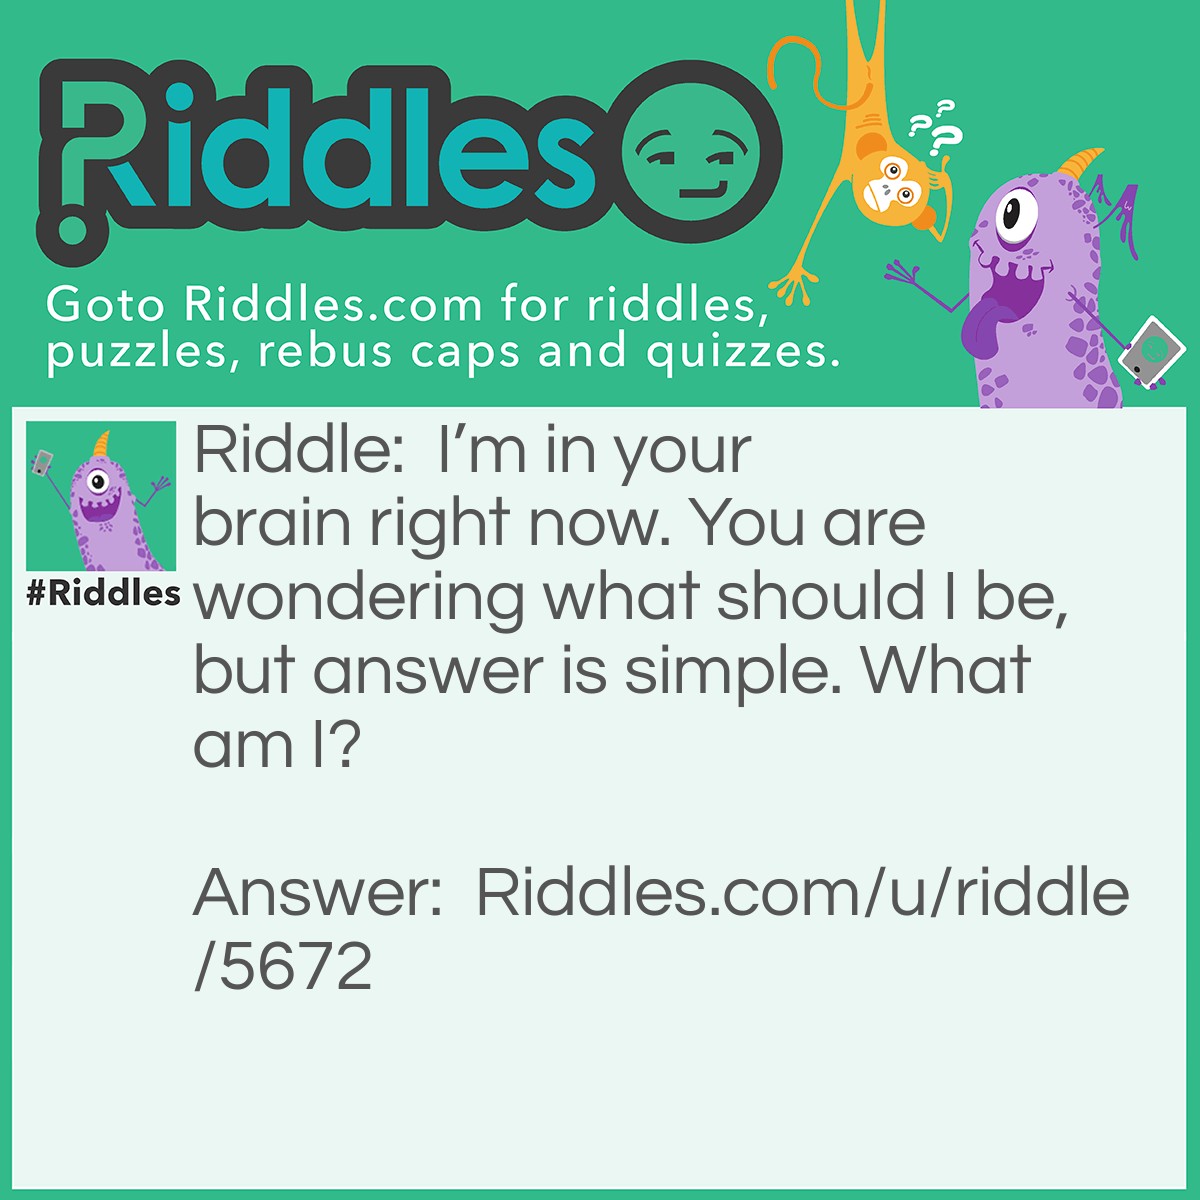 Riddle: I'm in your brain right now. You are wondering what should I be, but answer is simple. What am I? Answer: The Riddle.